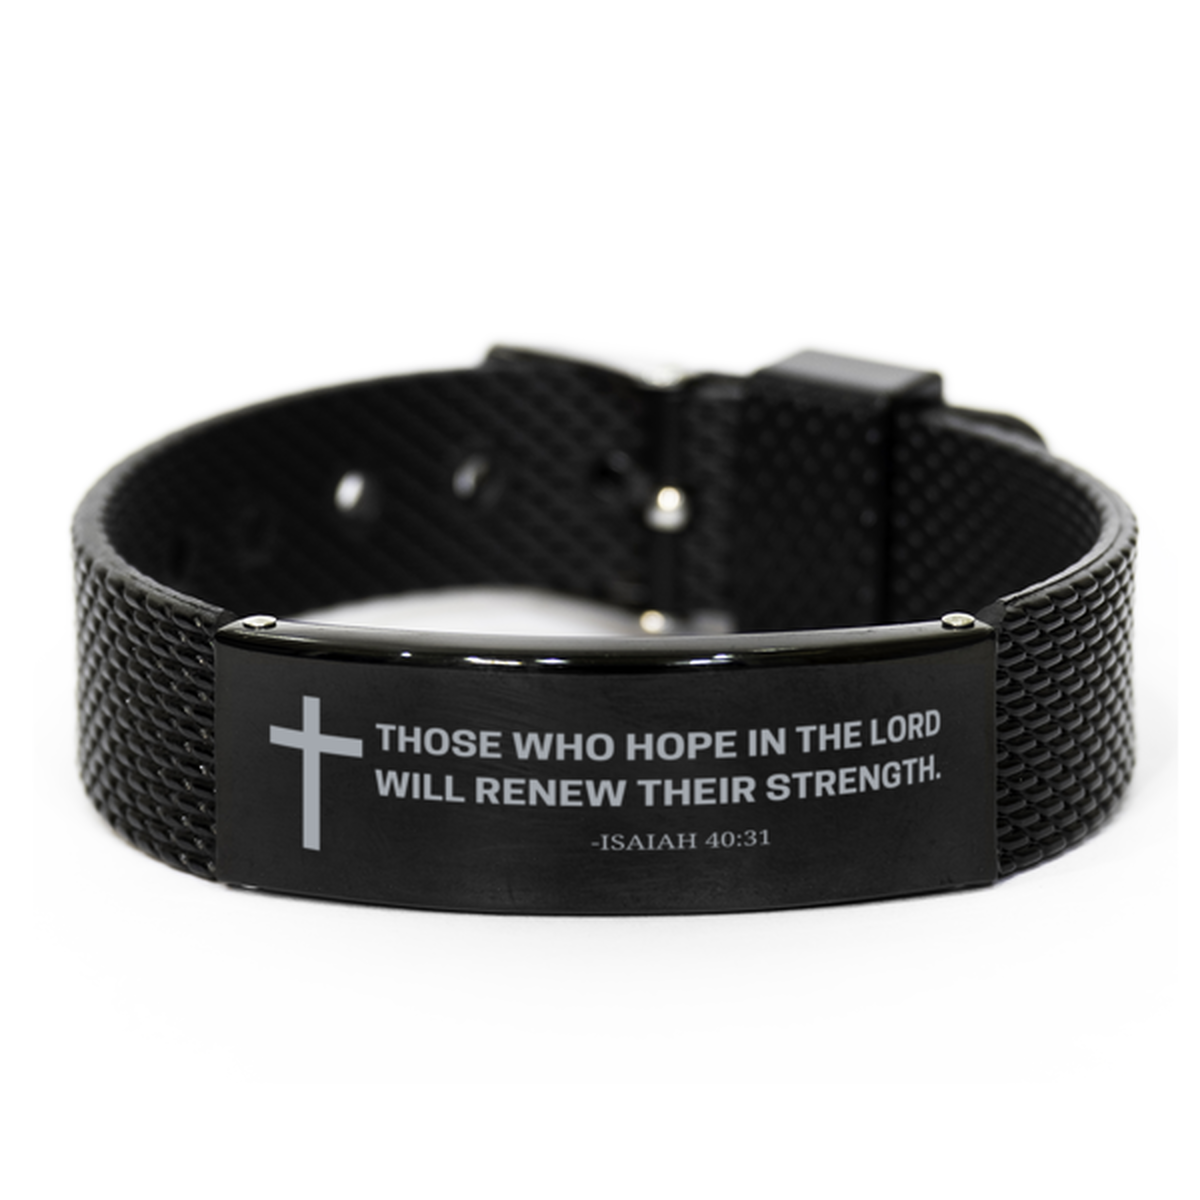 Baptism Gifts For Teenage Boys Girls, Christian Bible Verse Black Shark Mesh Bracelet, Those who hope in the Lord, Catholic Confirmation Gifts for Son, Godson, Grandson, Nephew